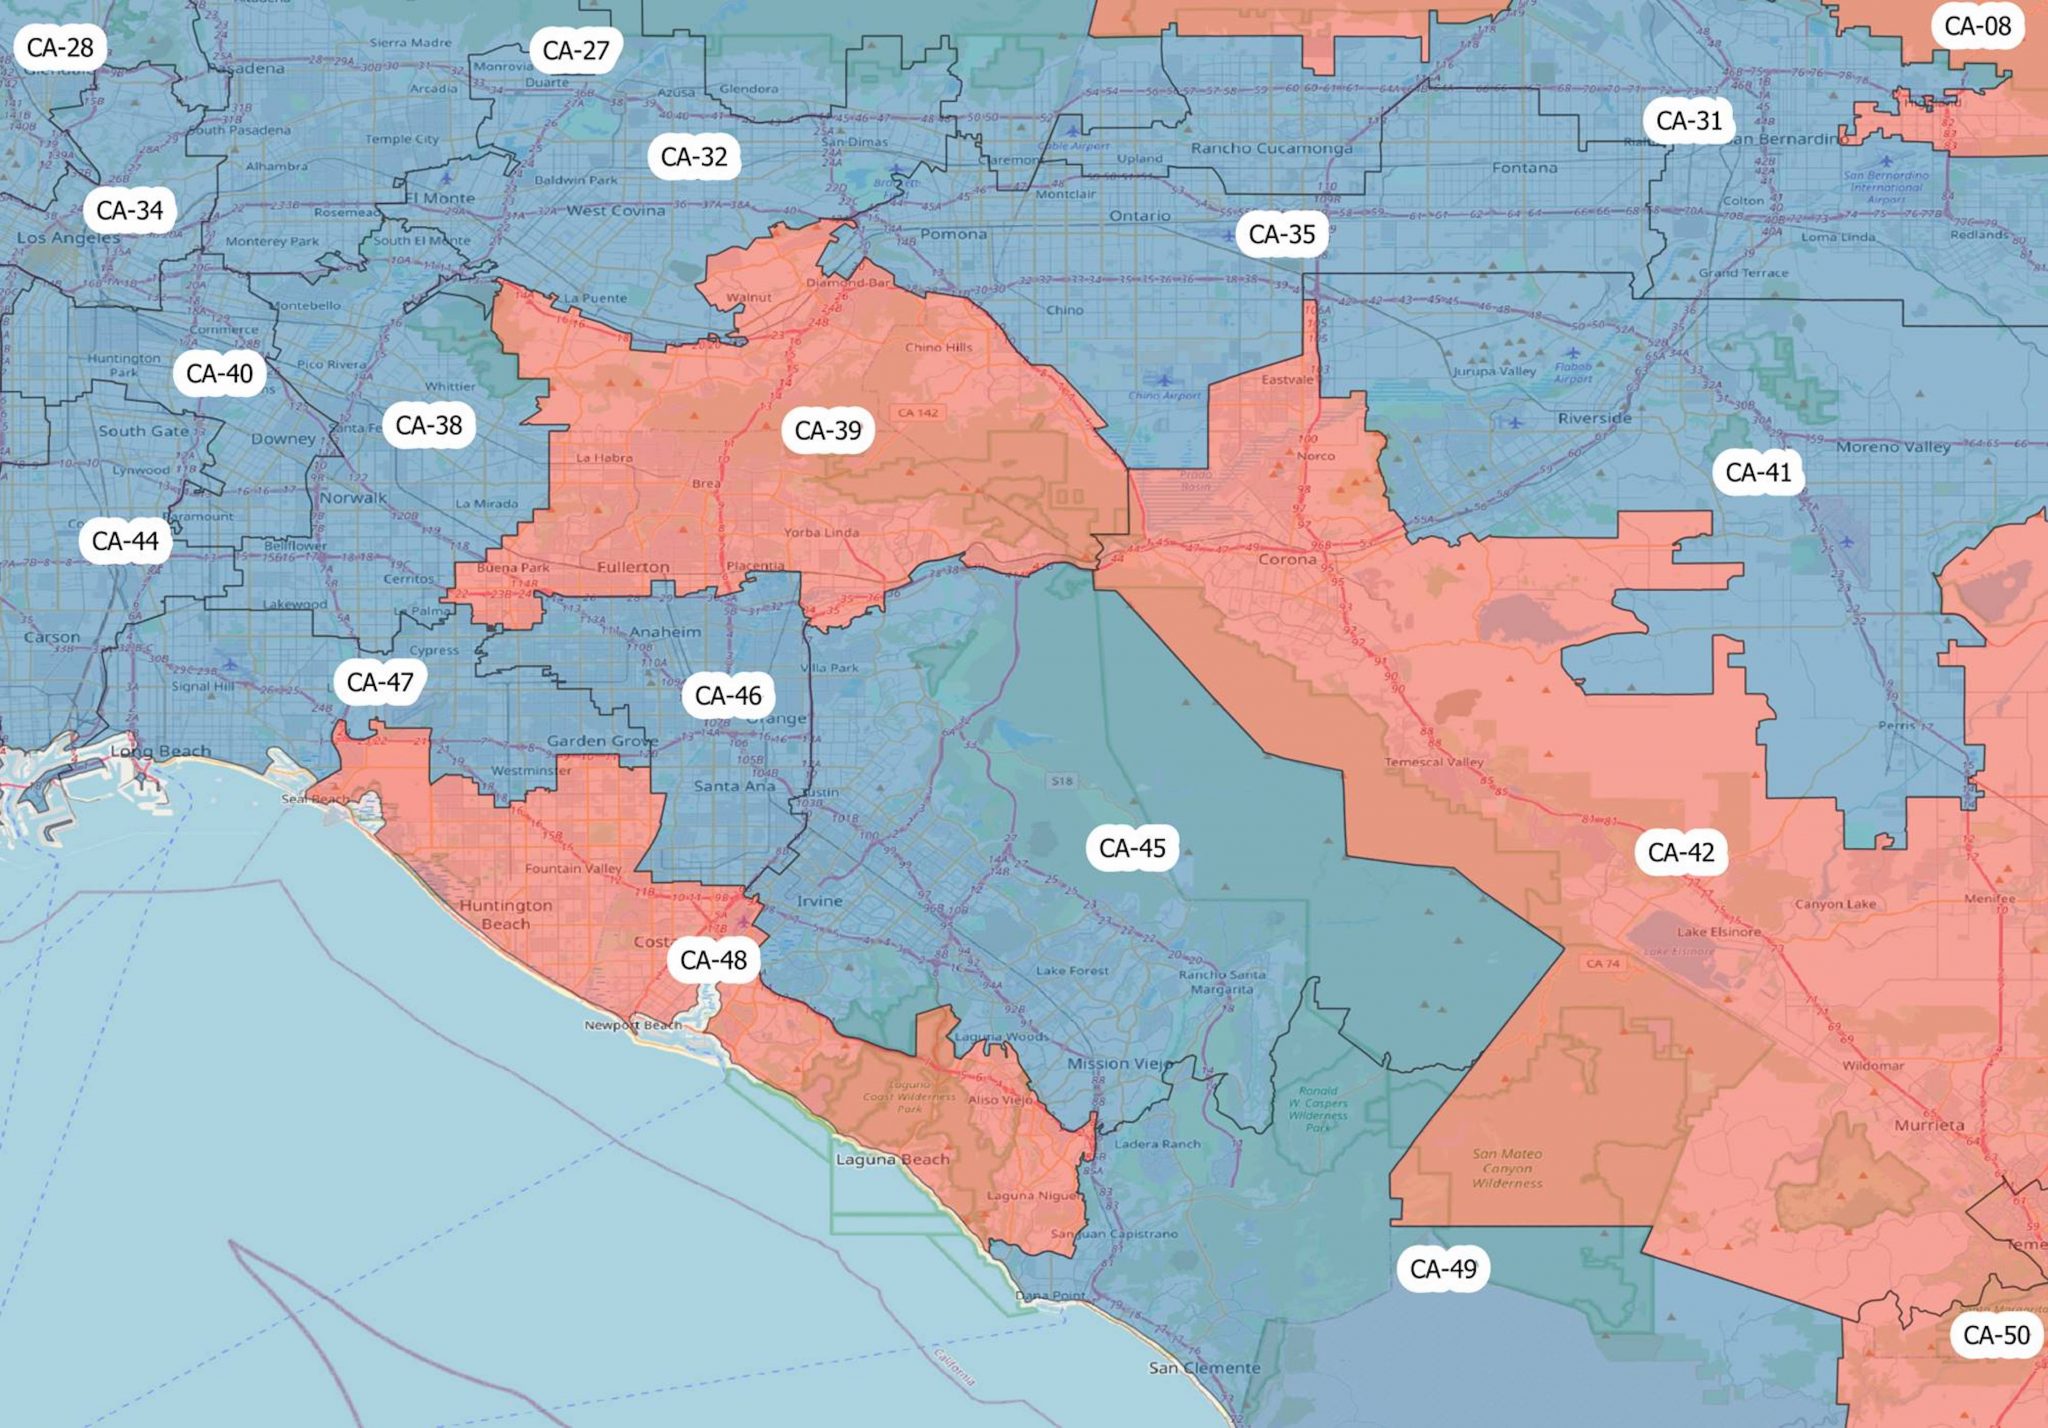 Congressional Districts Maps Demographic Data And Population Estimates 8627